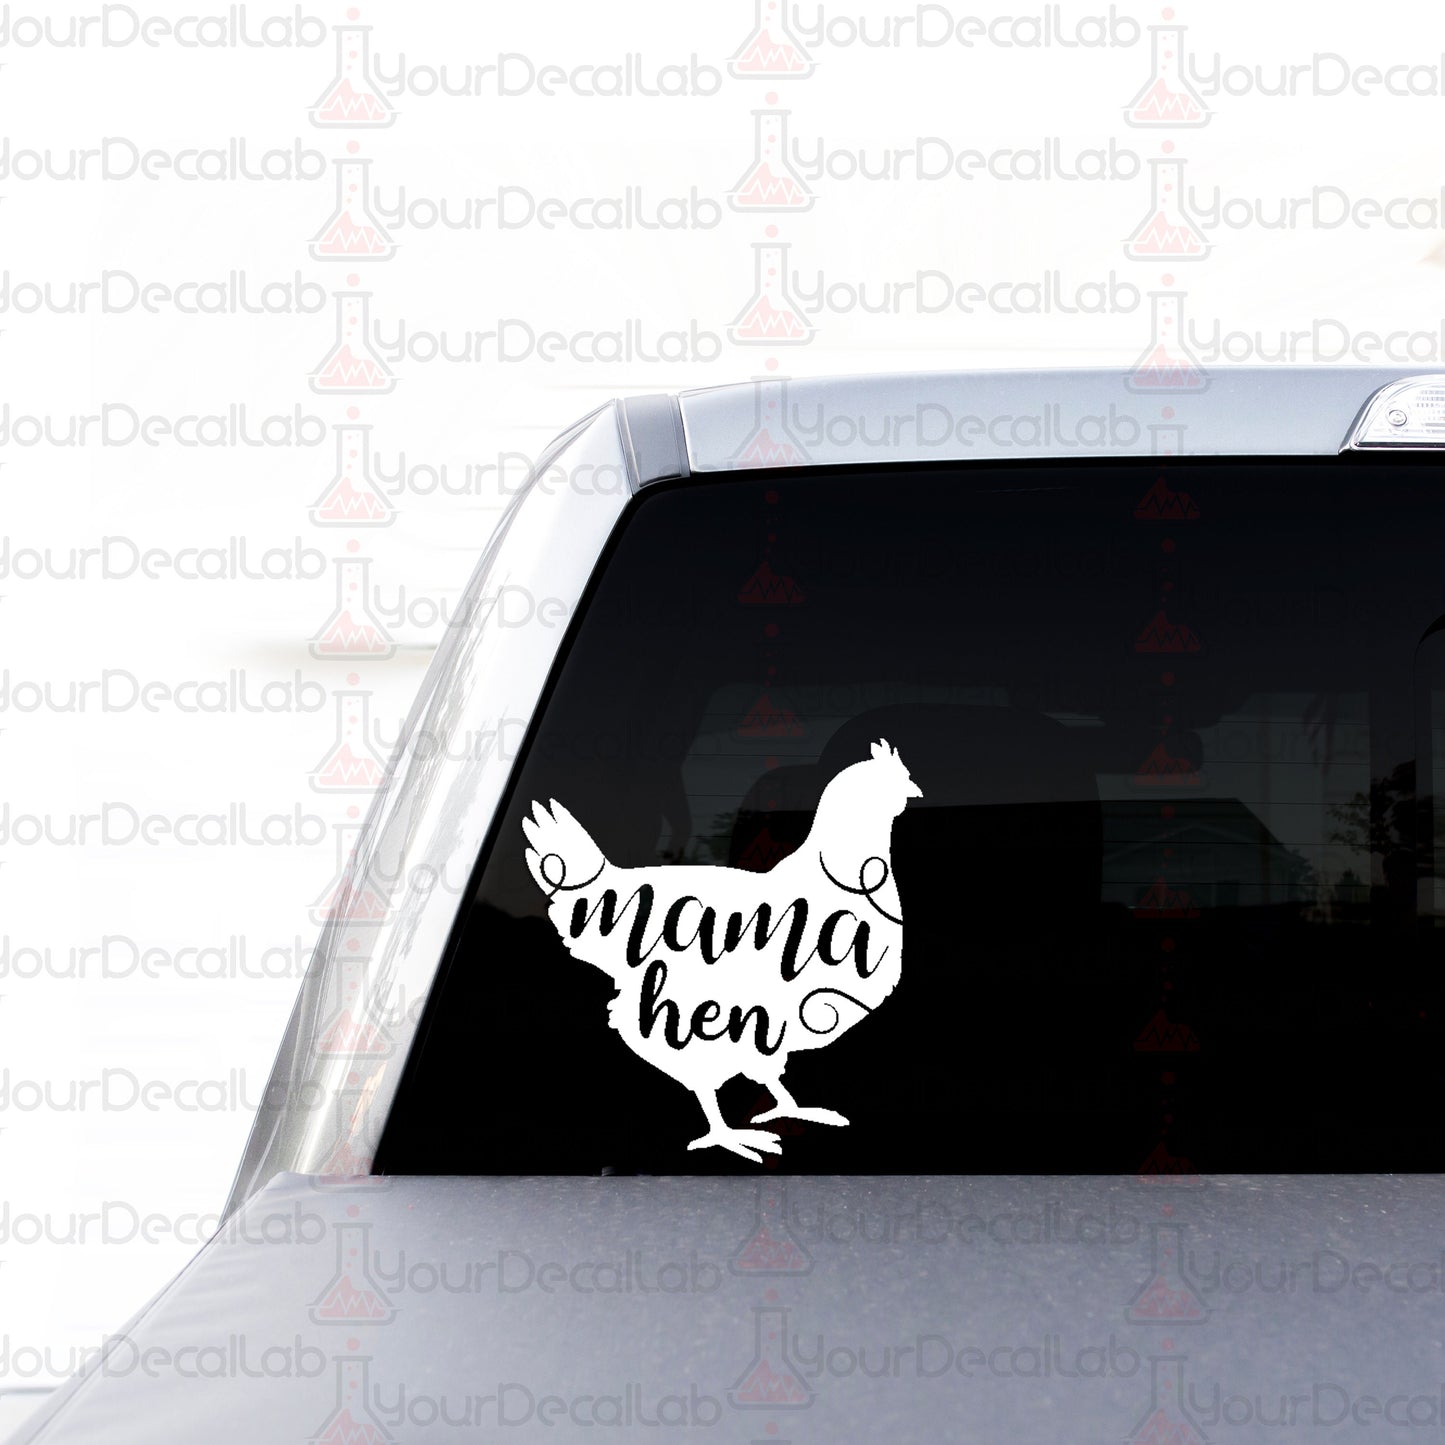 a sticker on the back of a car that says mama hen